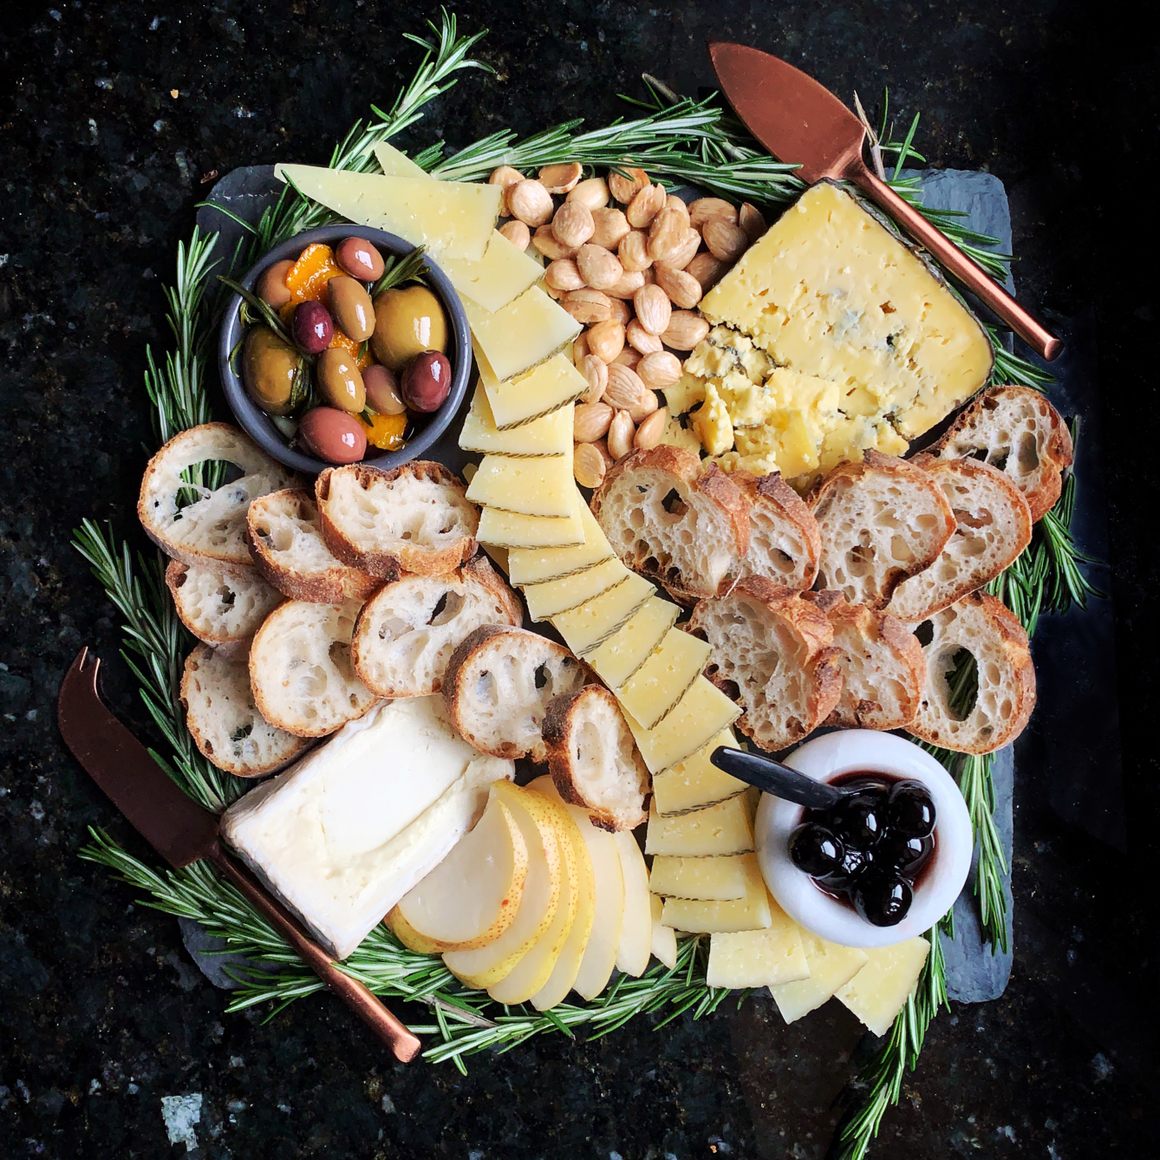 Cheese: History, Tasting, and Pairing With Erika Kubick - Atlas Obscura ...